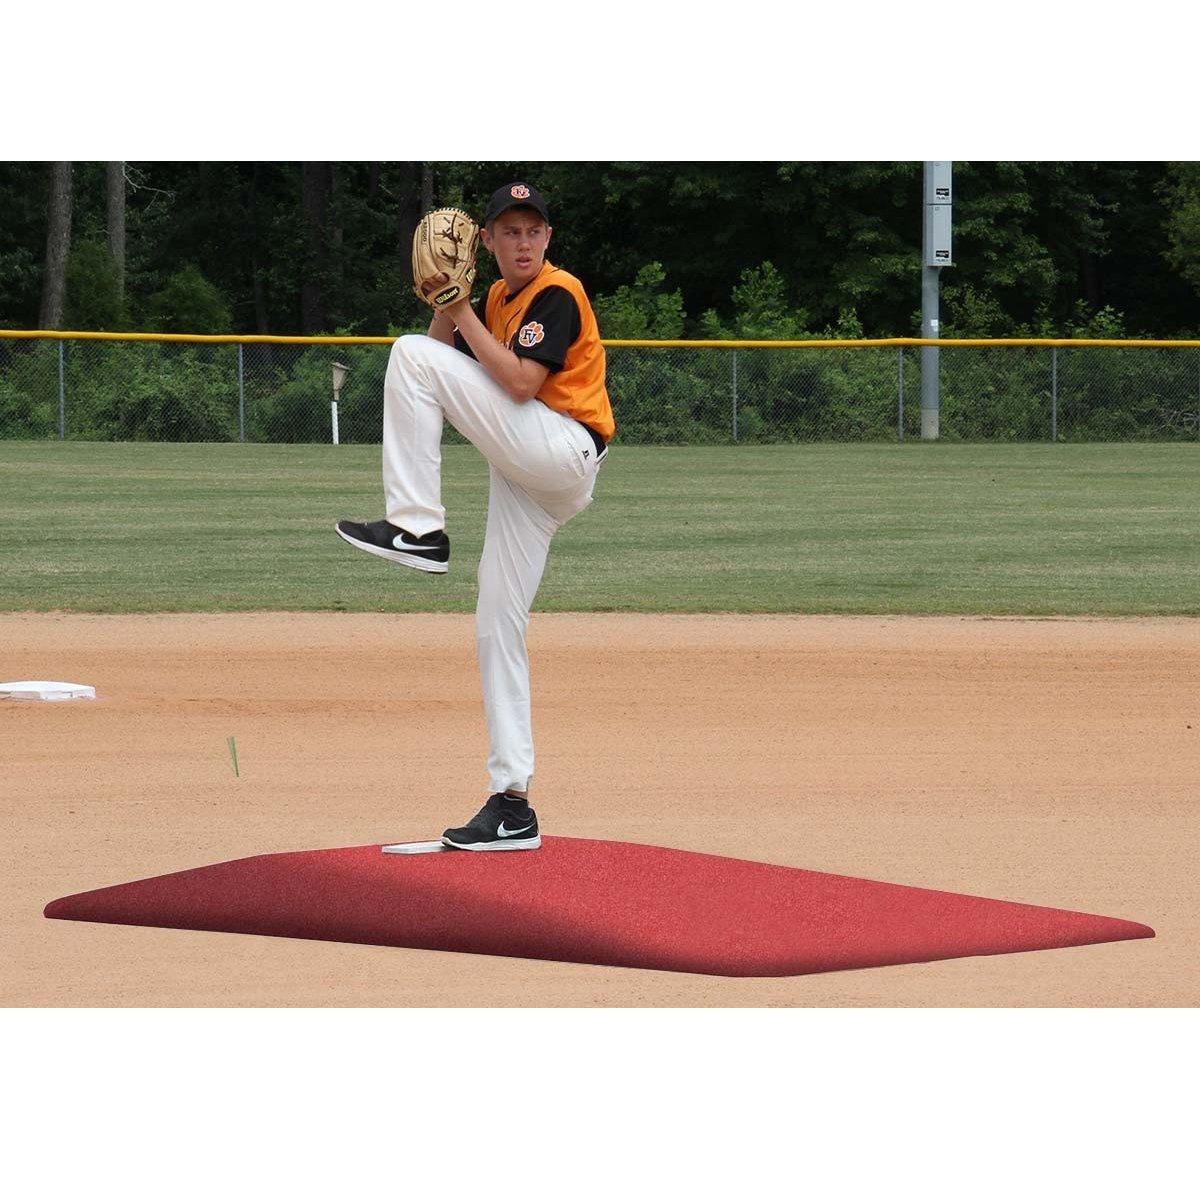 Portable Little League 'Junior' Game Pitching Mound - Pitch Pro Direct